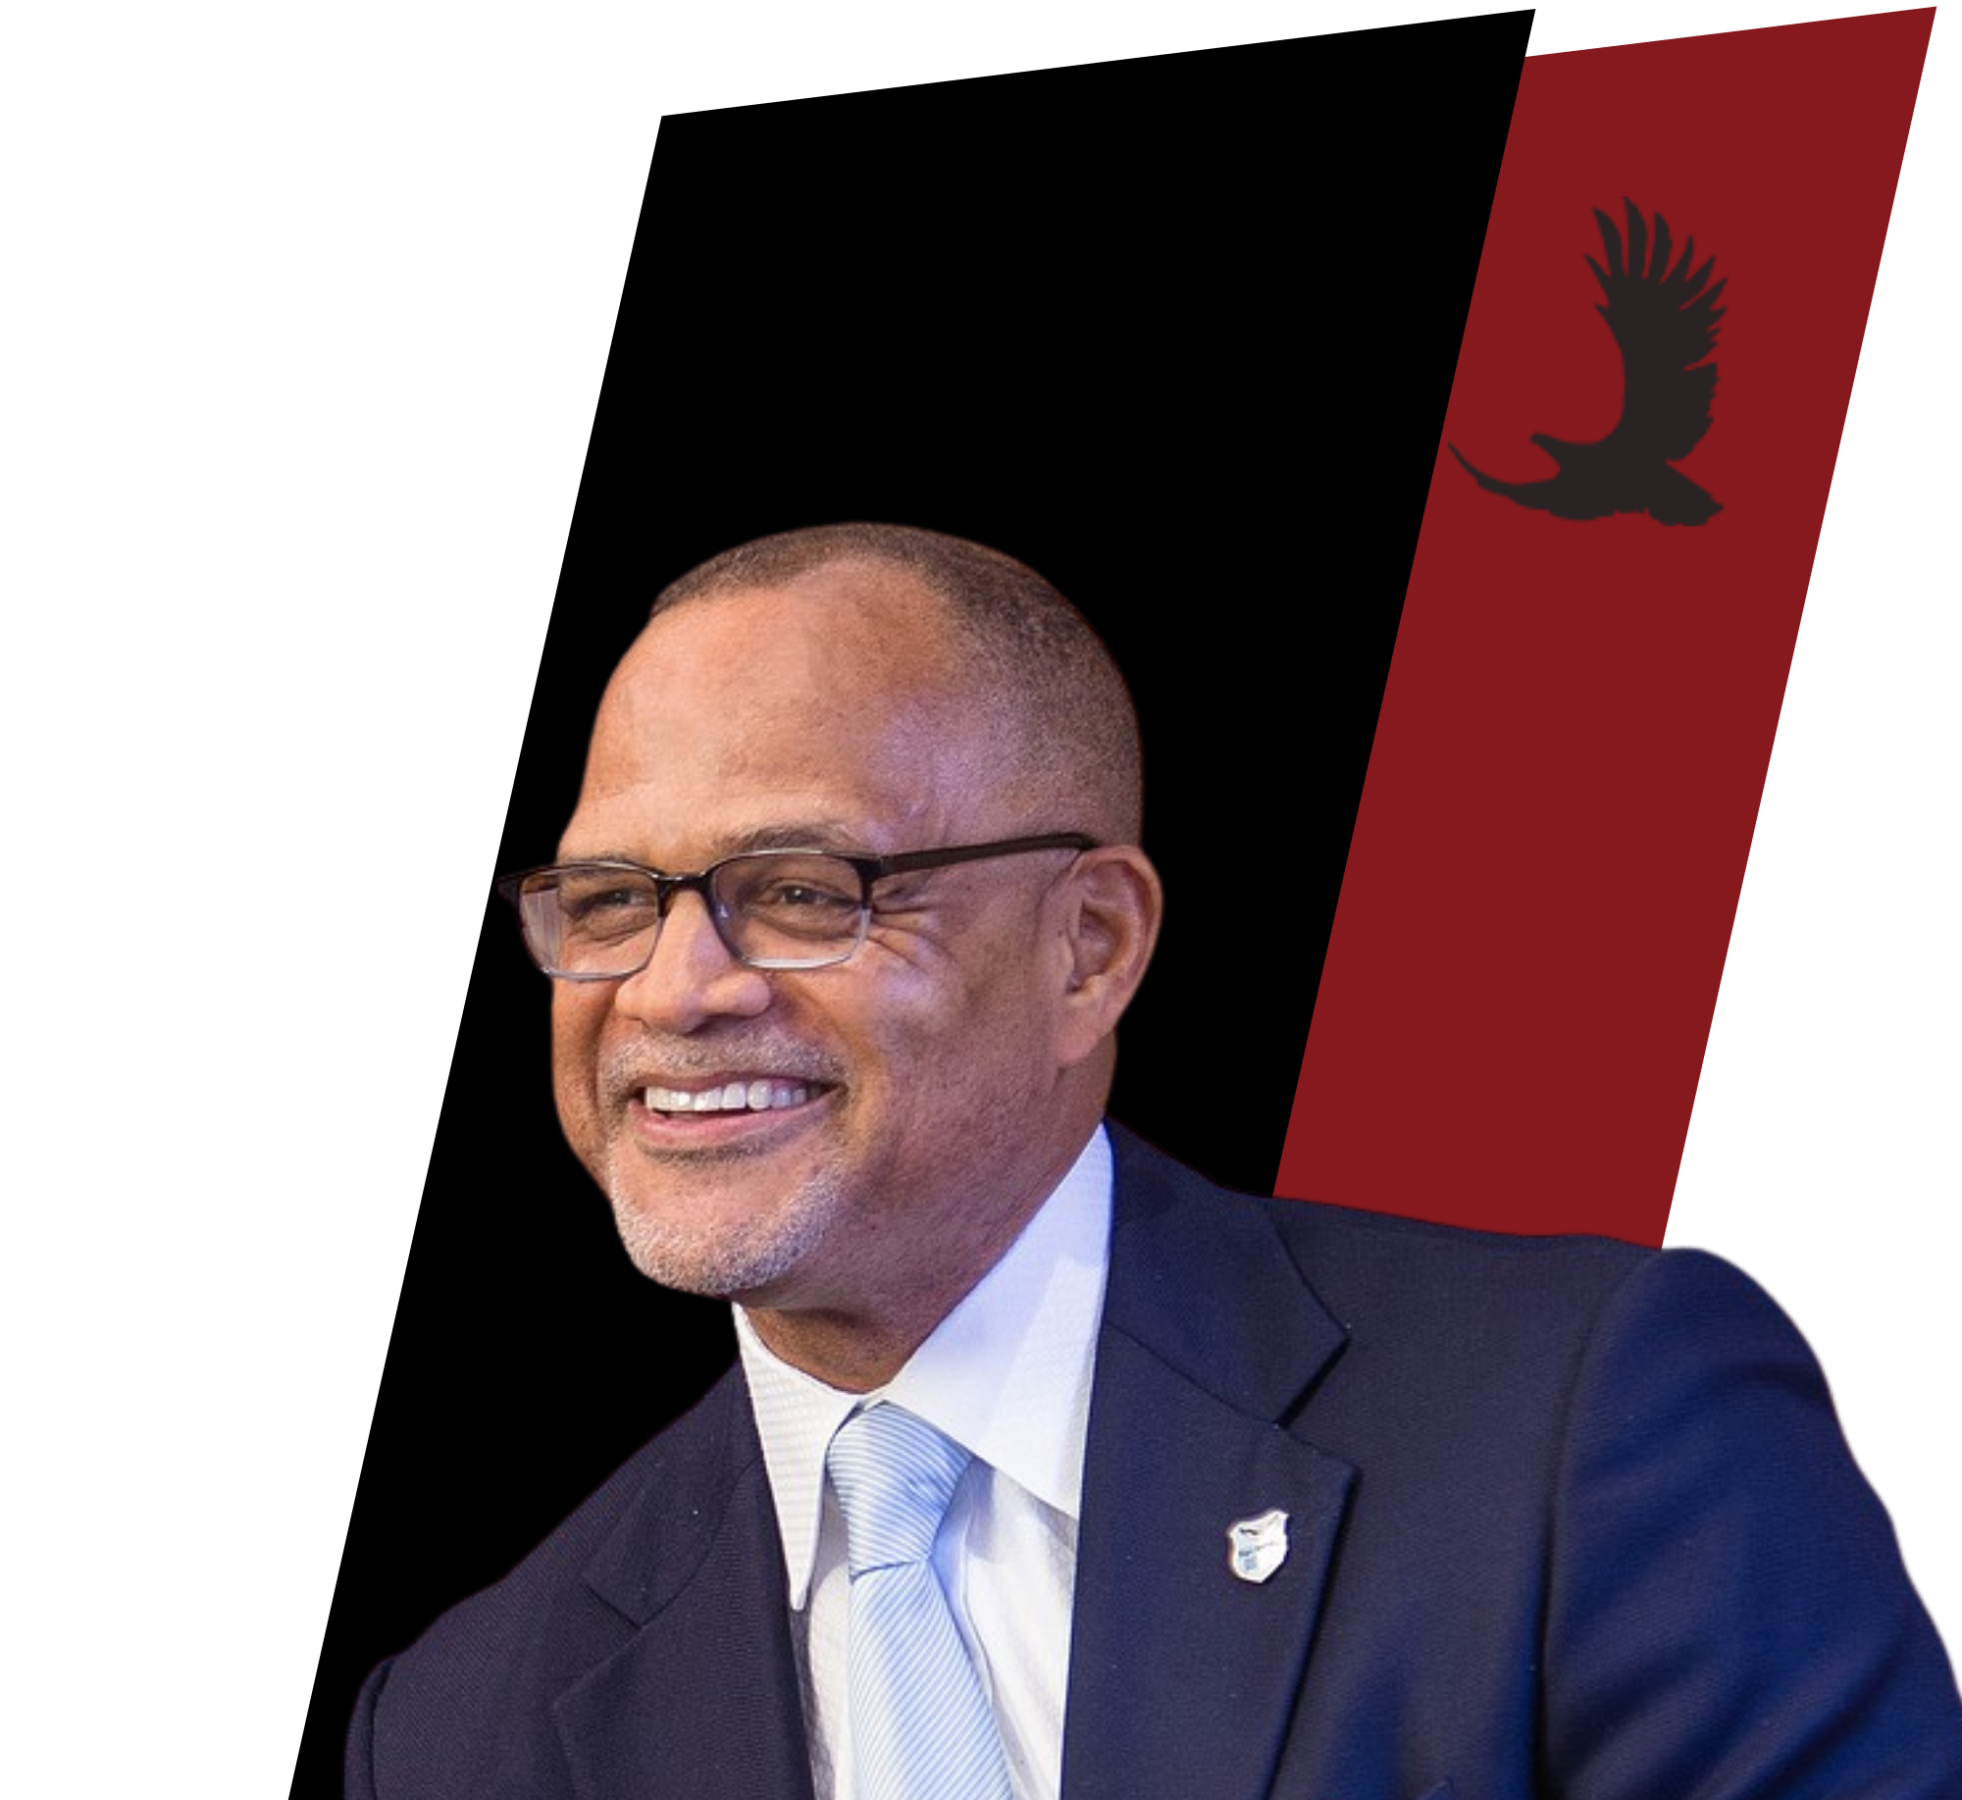 David C. Banks - New York City Schools Chancellor (Former President and CEO of The Eagle Academy Foundation